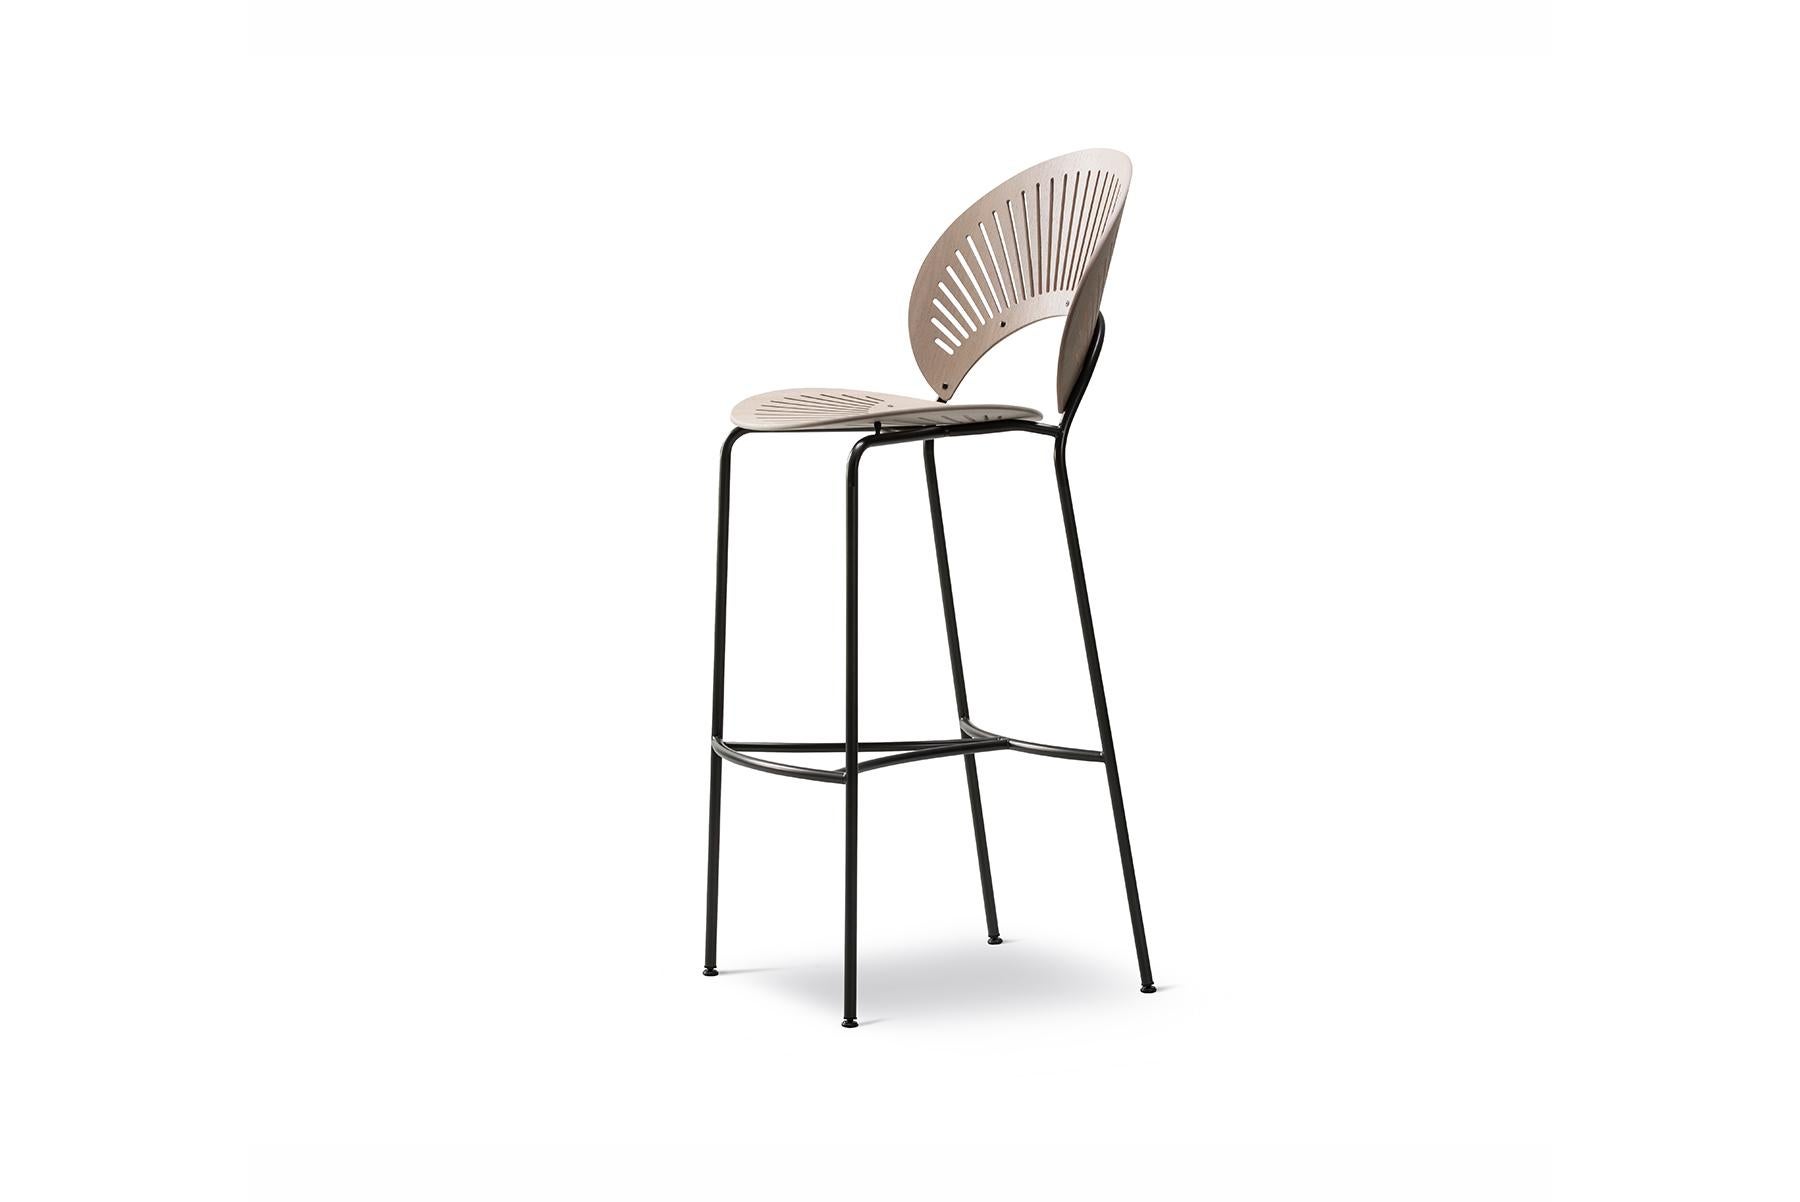 In 1998, Ditzel added a barstool version to her award-winning Trinidad series. The sliced and curved back shell provides unparalleled seating comfort. Optional seat upholstery.